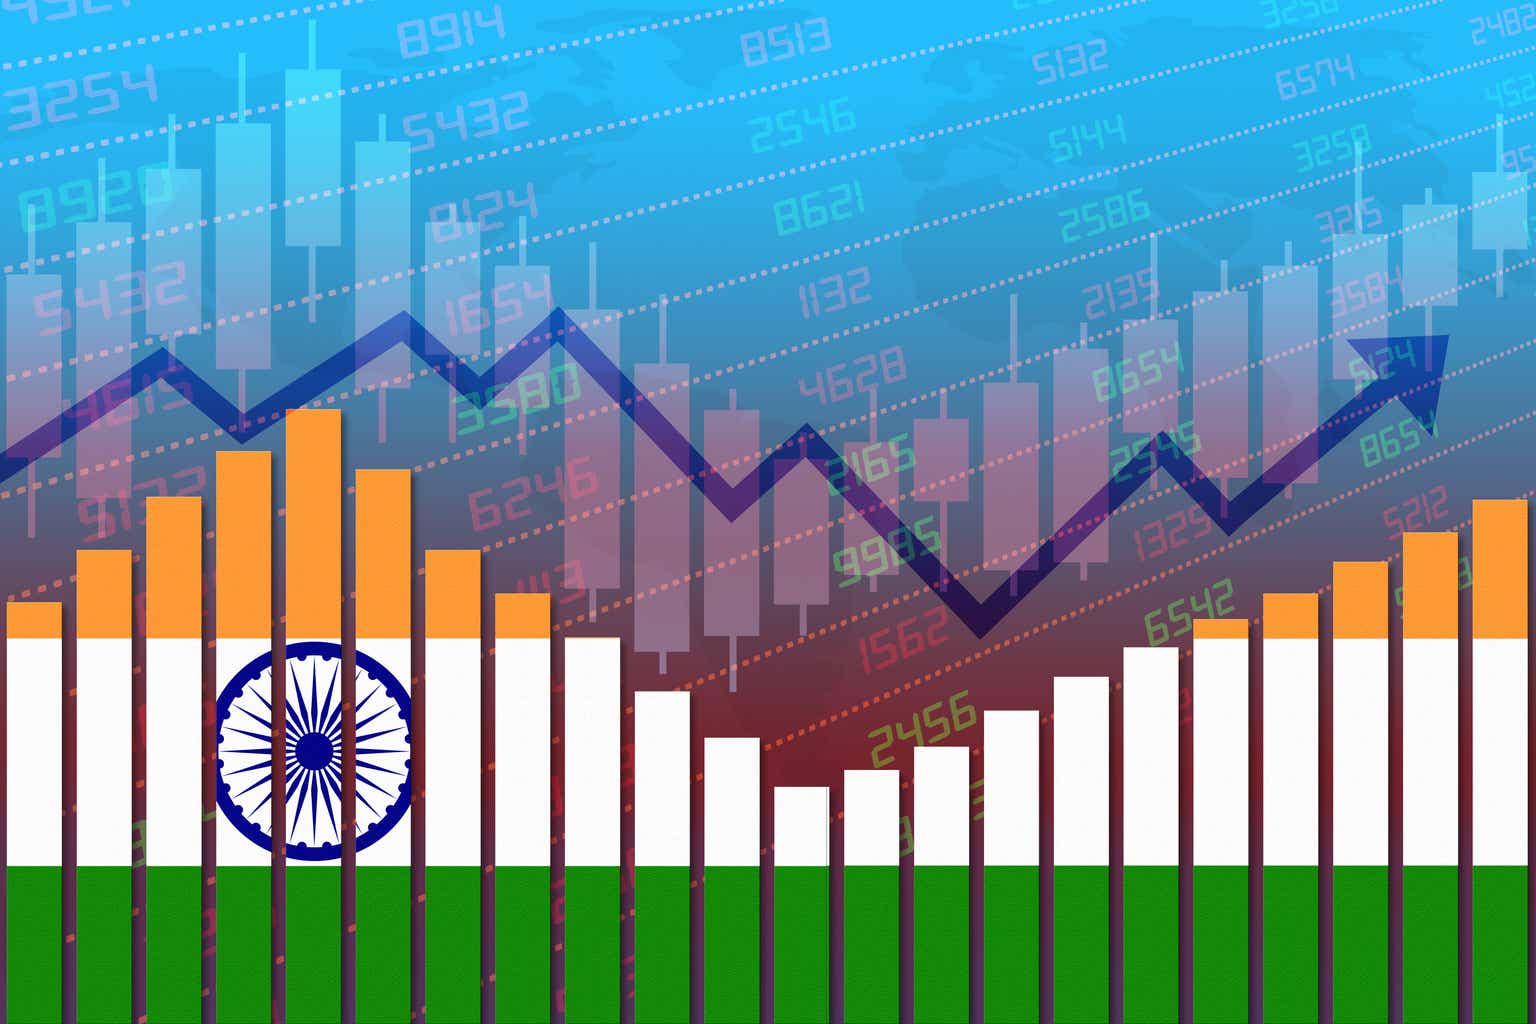 INDA: A Steeper But Not Unreasonable Price For India's Growth Story